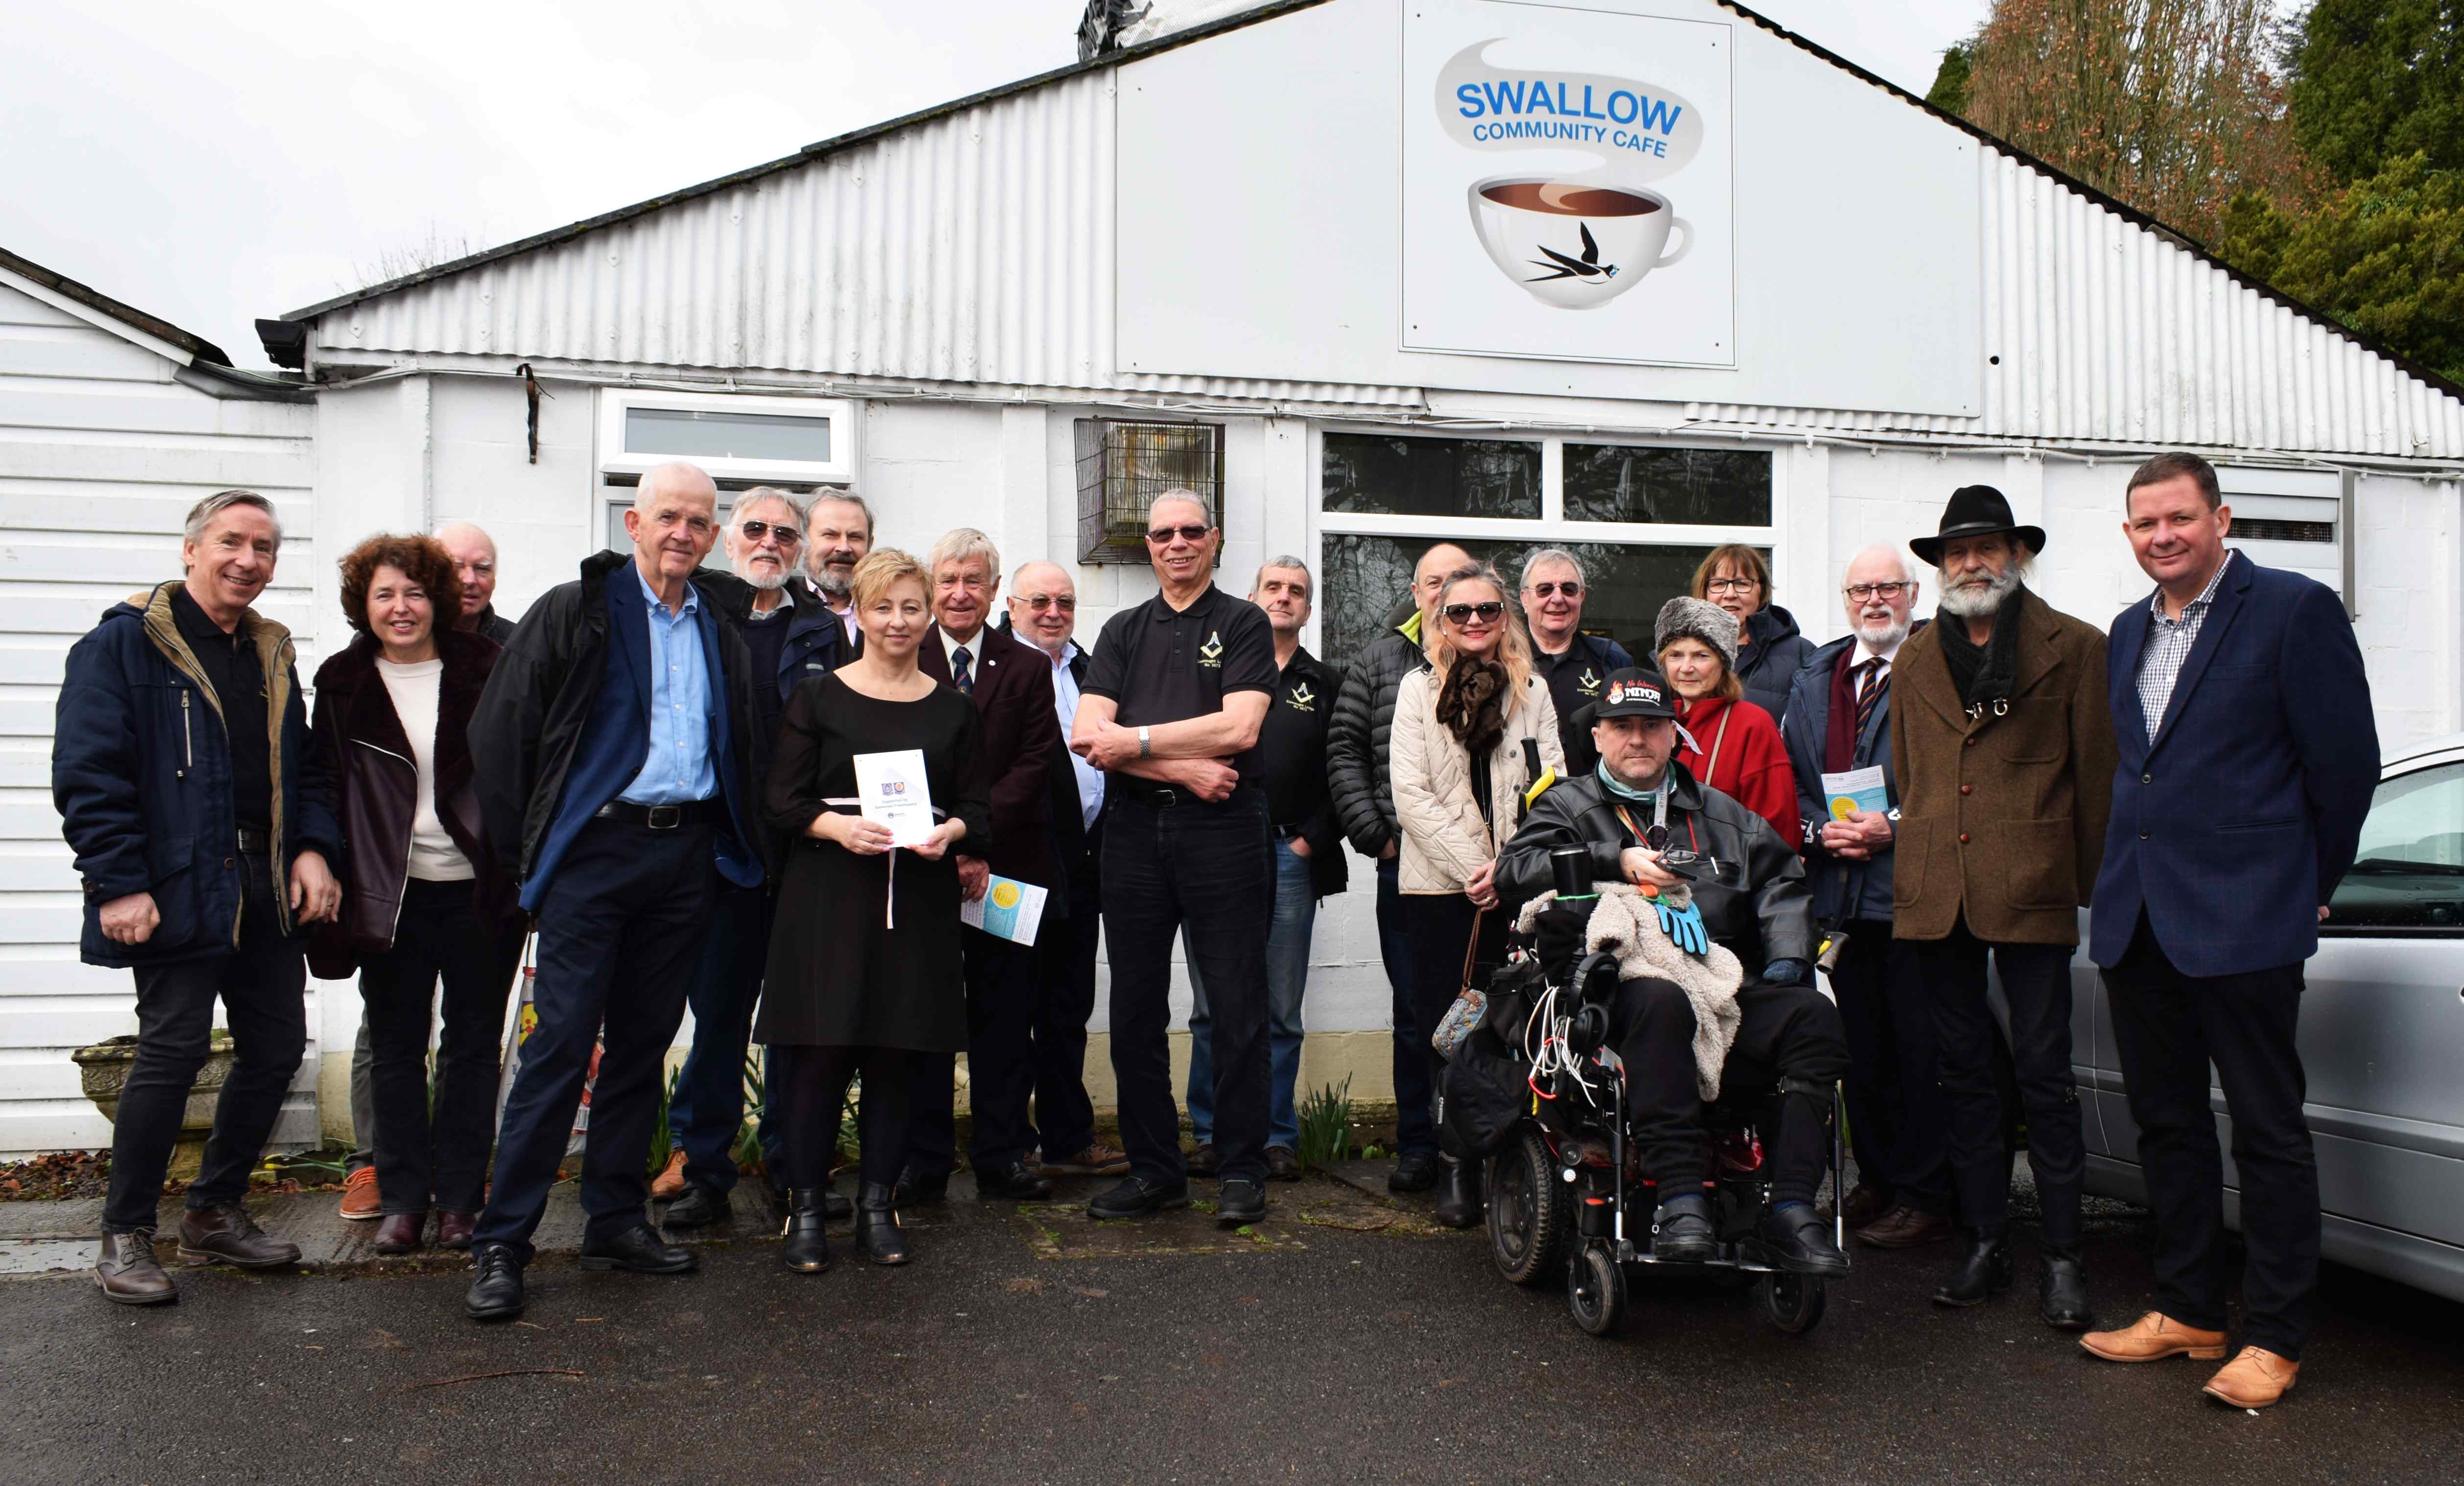 Somerset Freemasons with SWALLOW Charity Group